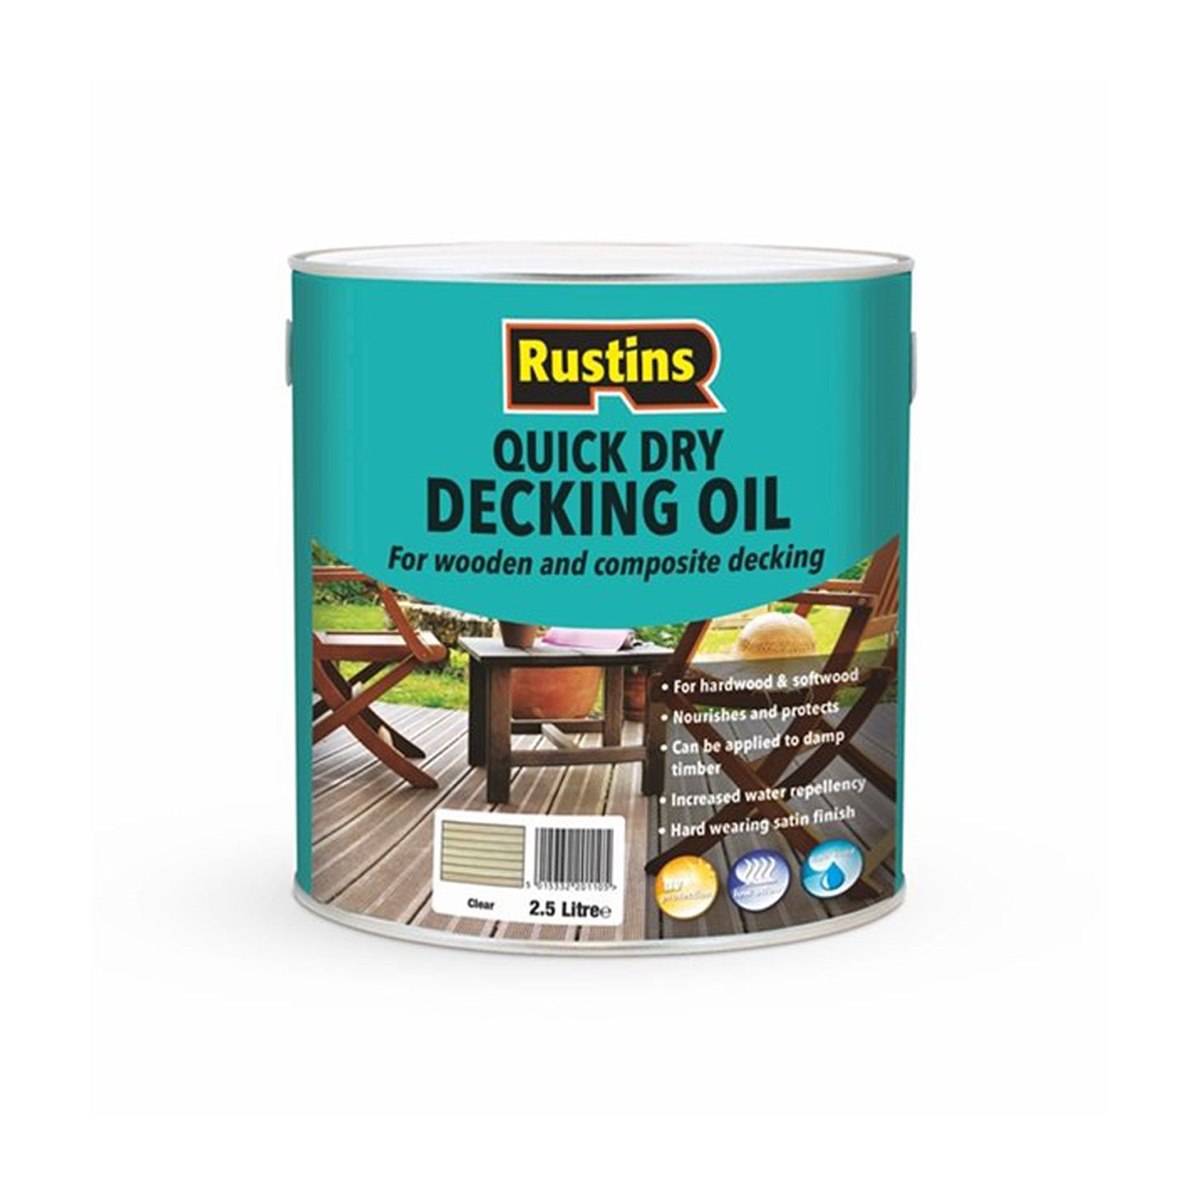 Rustins Quick Dry Decking Oil Clear 2.5 Litre